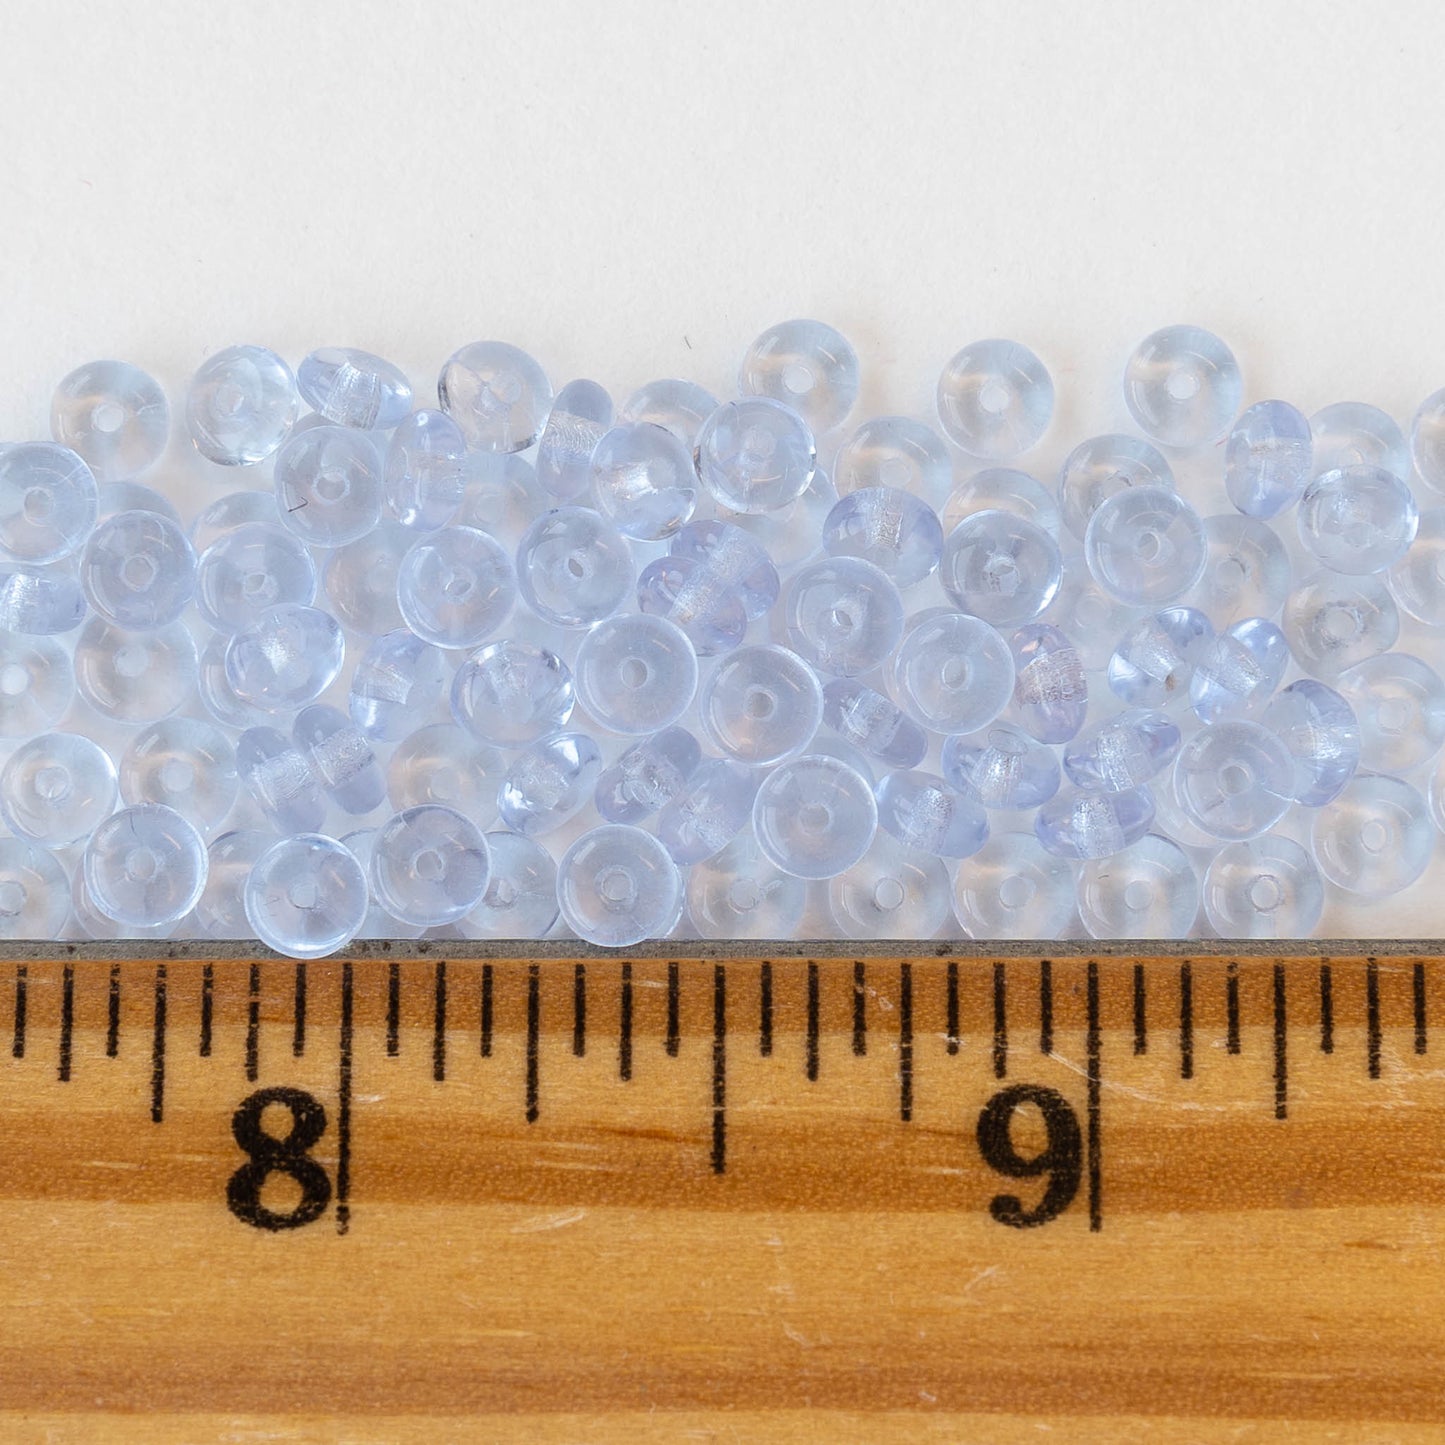 4mm Rondelle Beads - Lavender - 100 beads